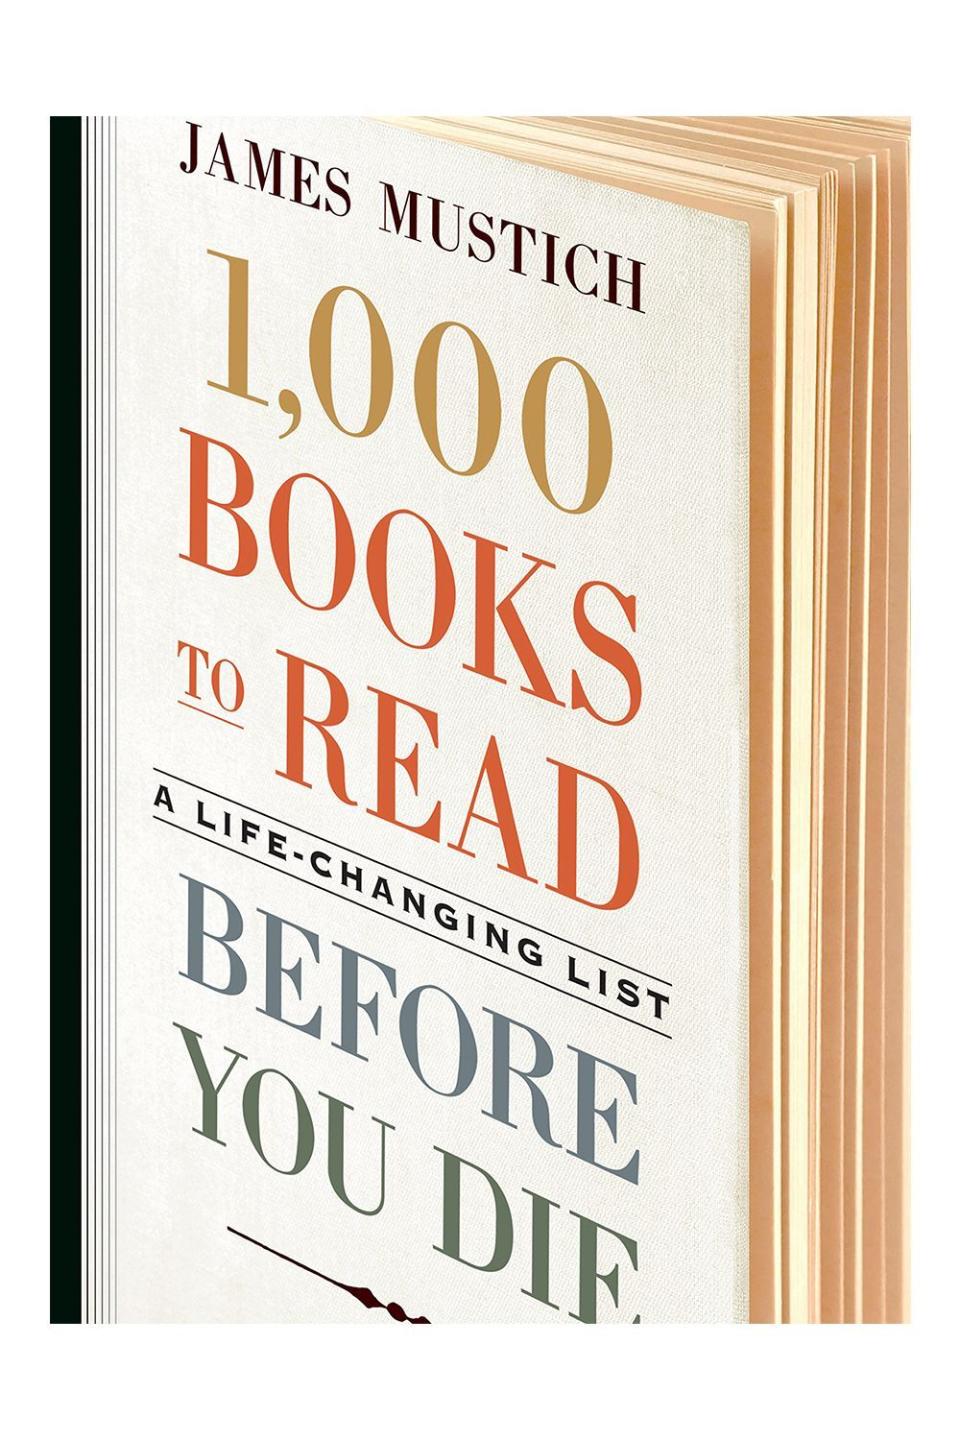 14) 1,000 Books to Read Before You Die